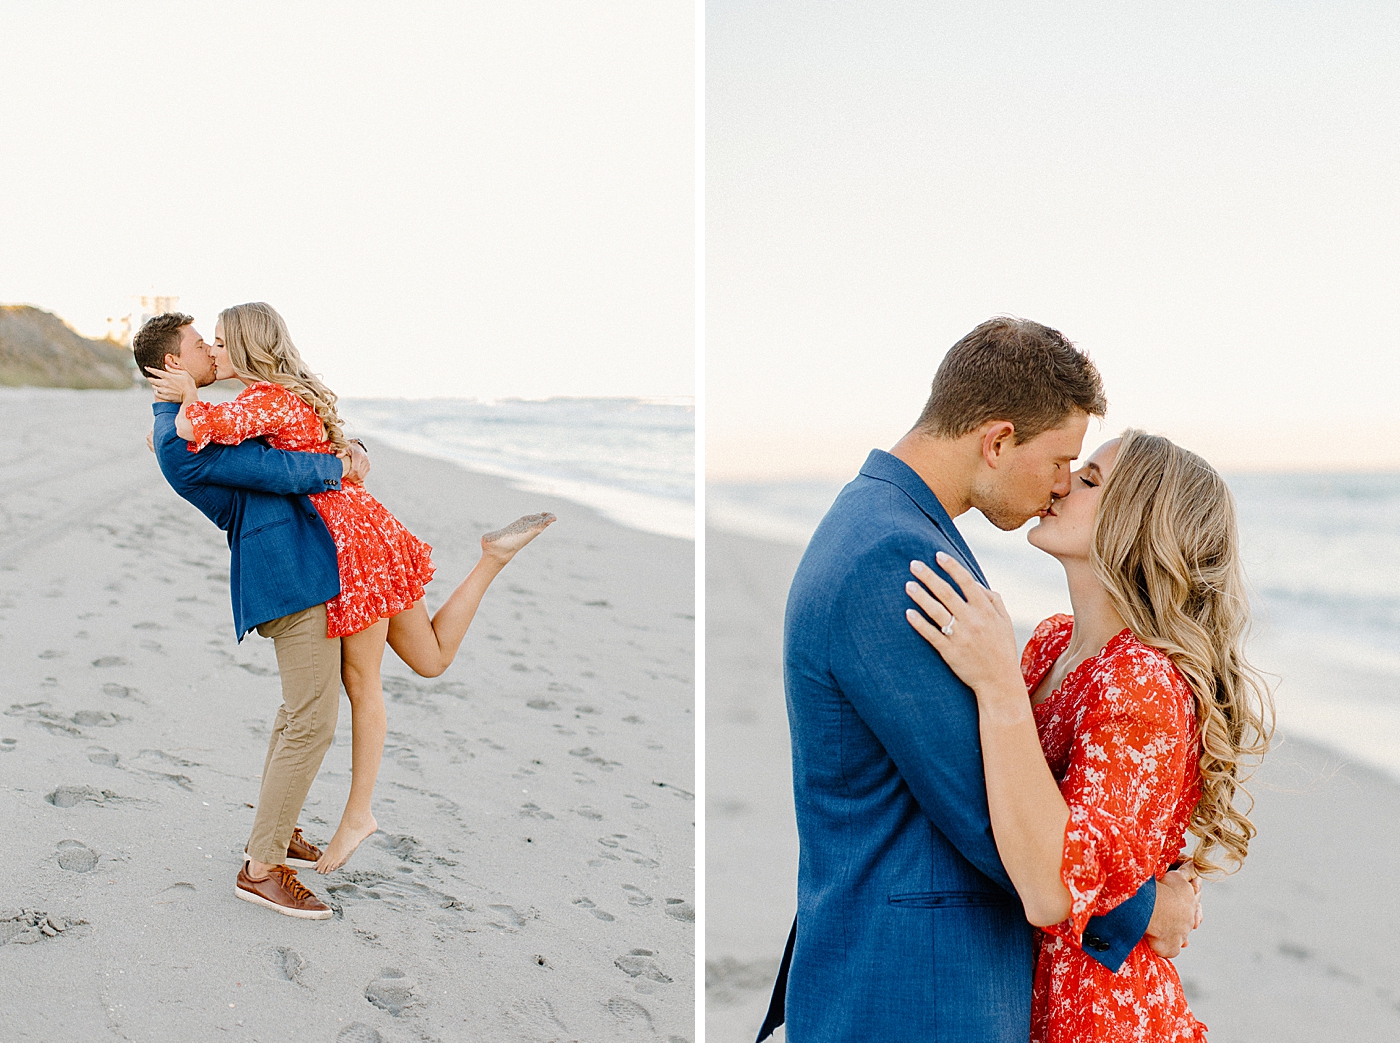 Man picks up lady on the beach and kisses her as she lifts one foot up Red Reef Park Engagement Photography captured by South Florida Engagement Photographer